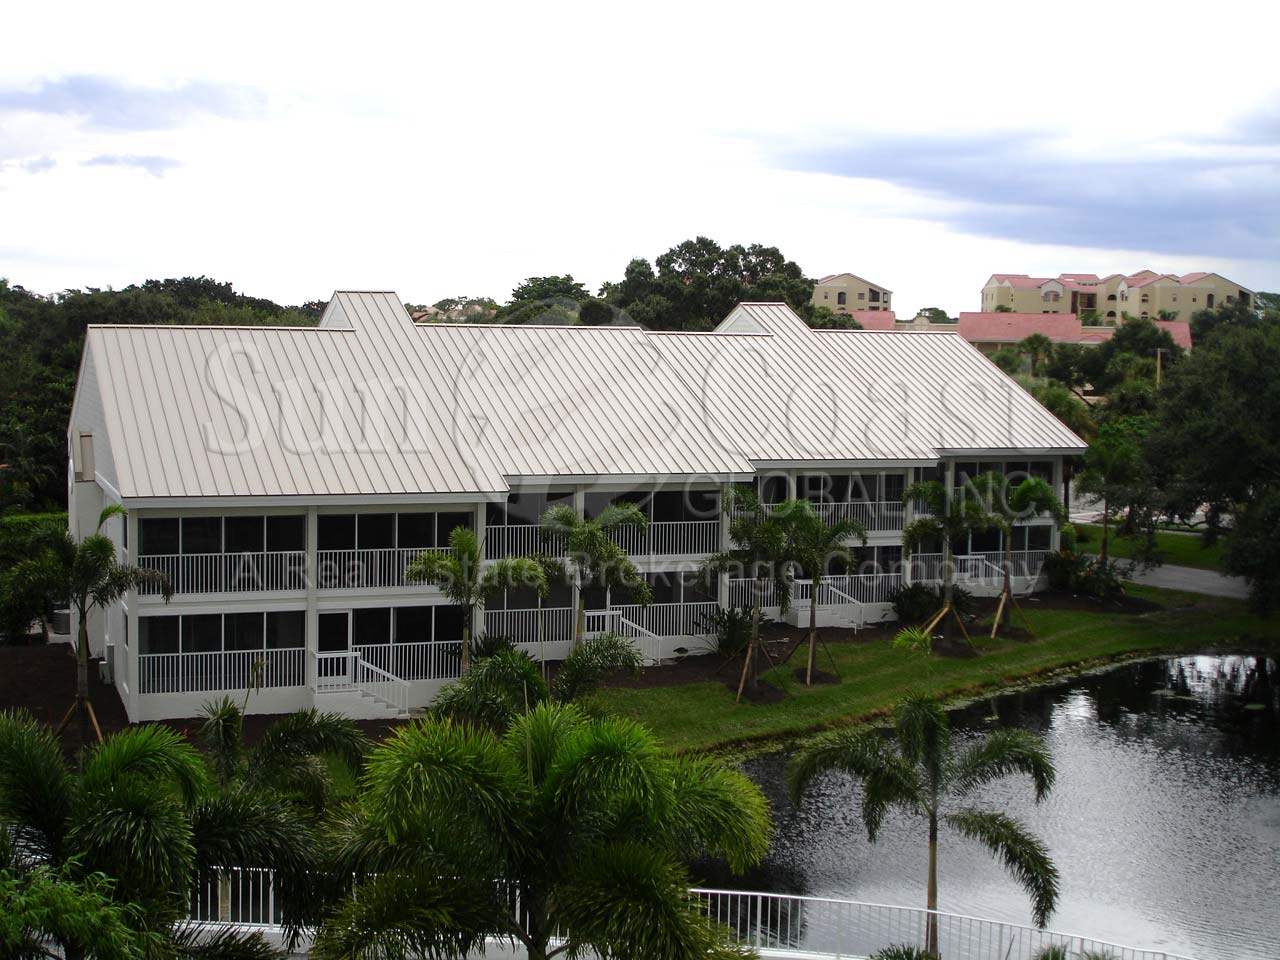 View of the St Lucia Condominiums and Lanais overlooking the Community Lake